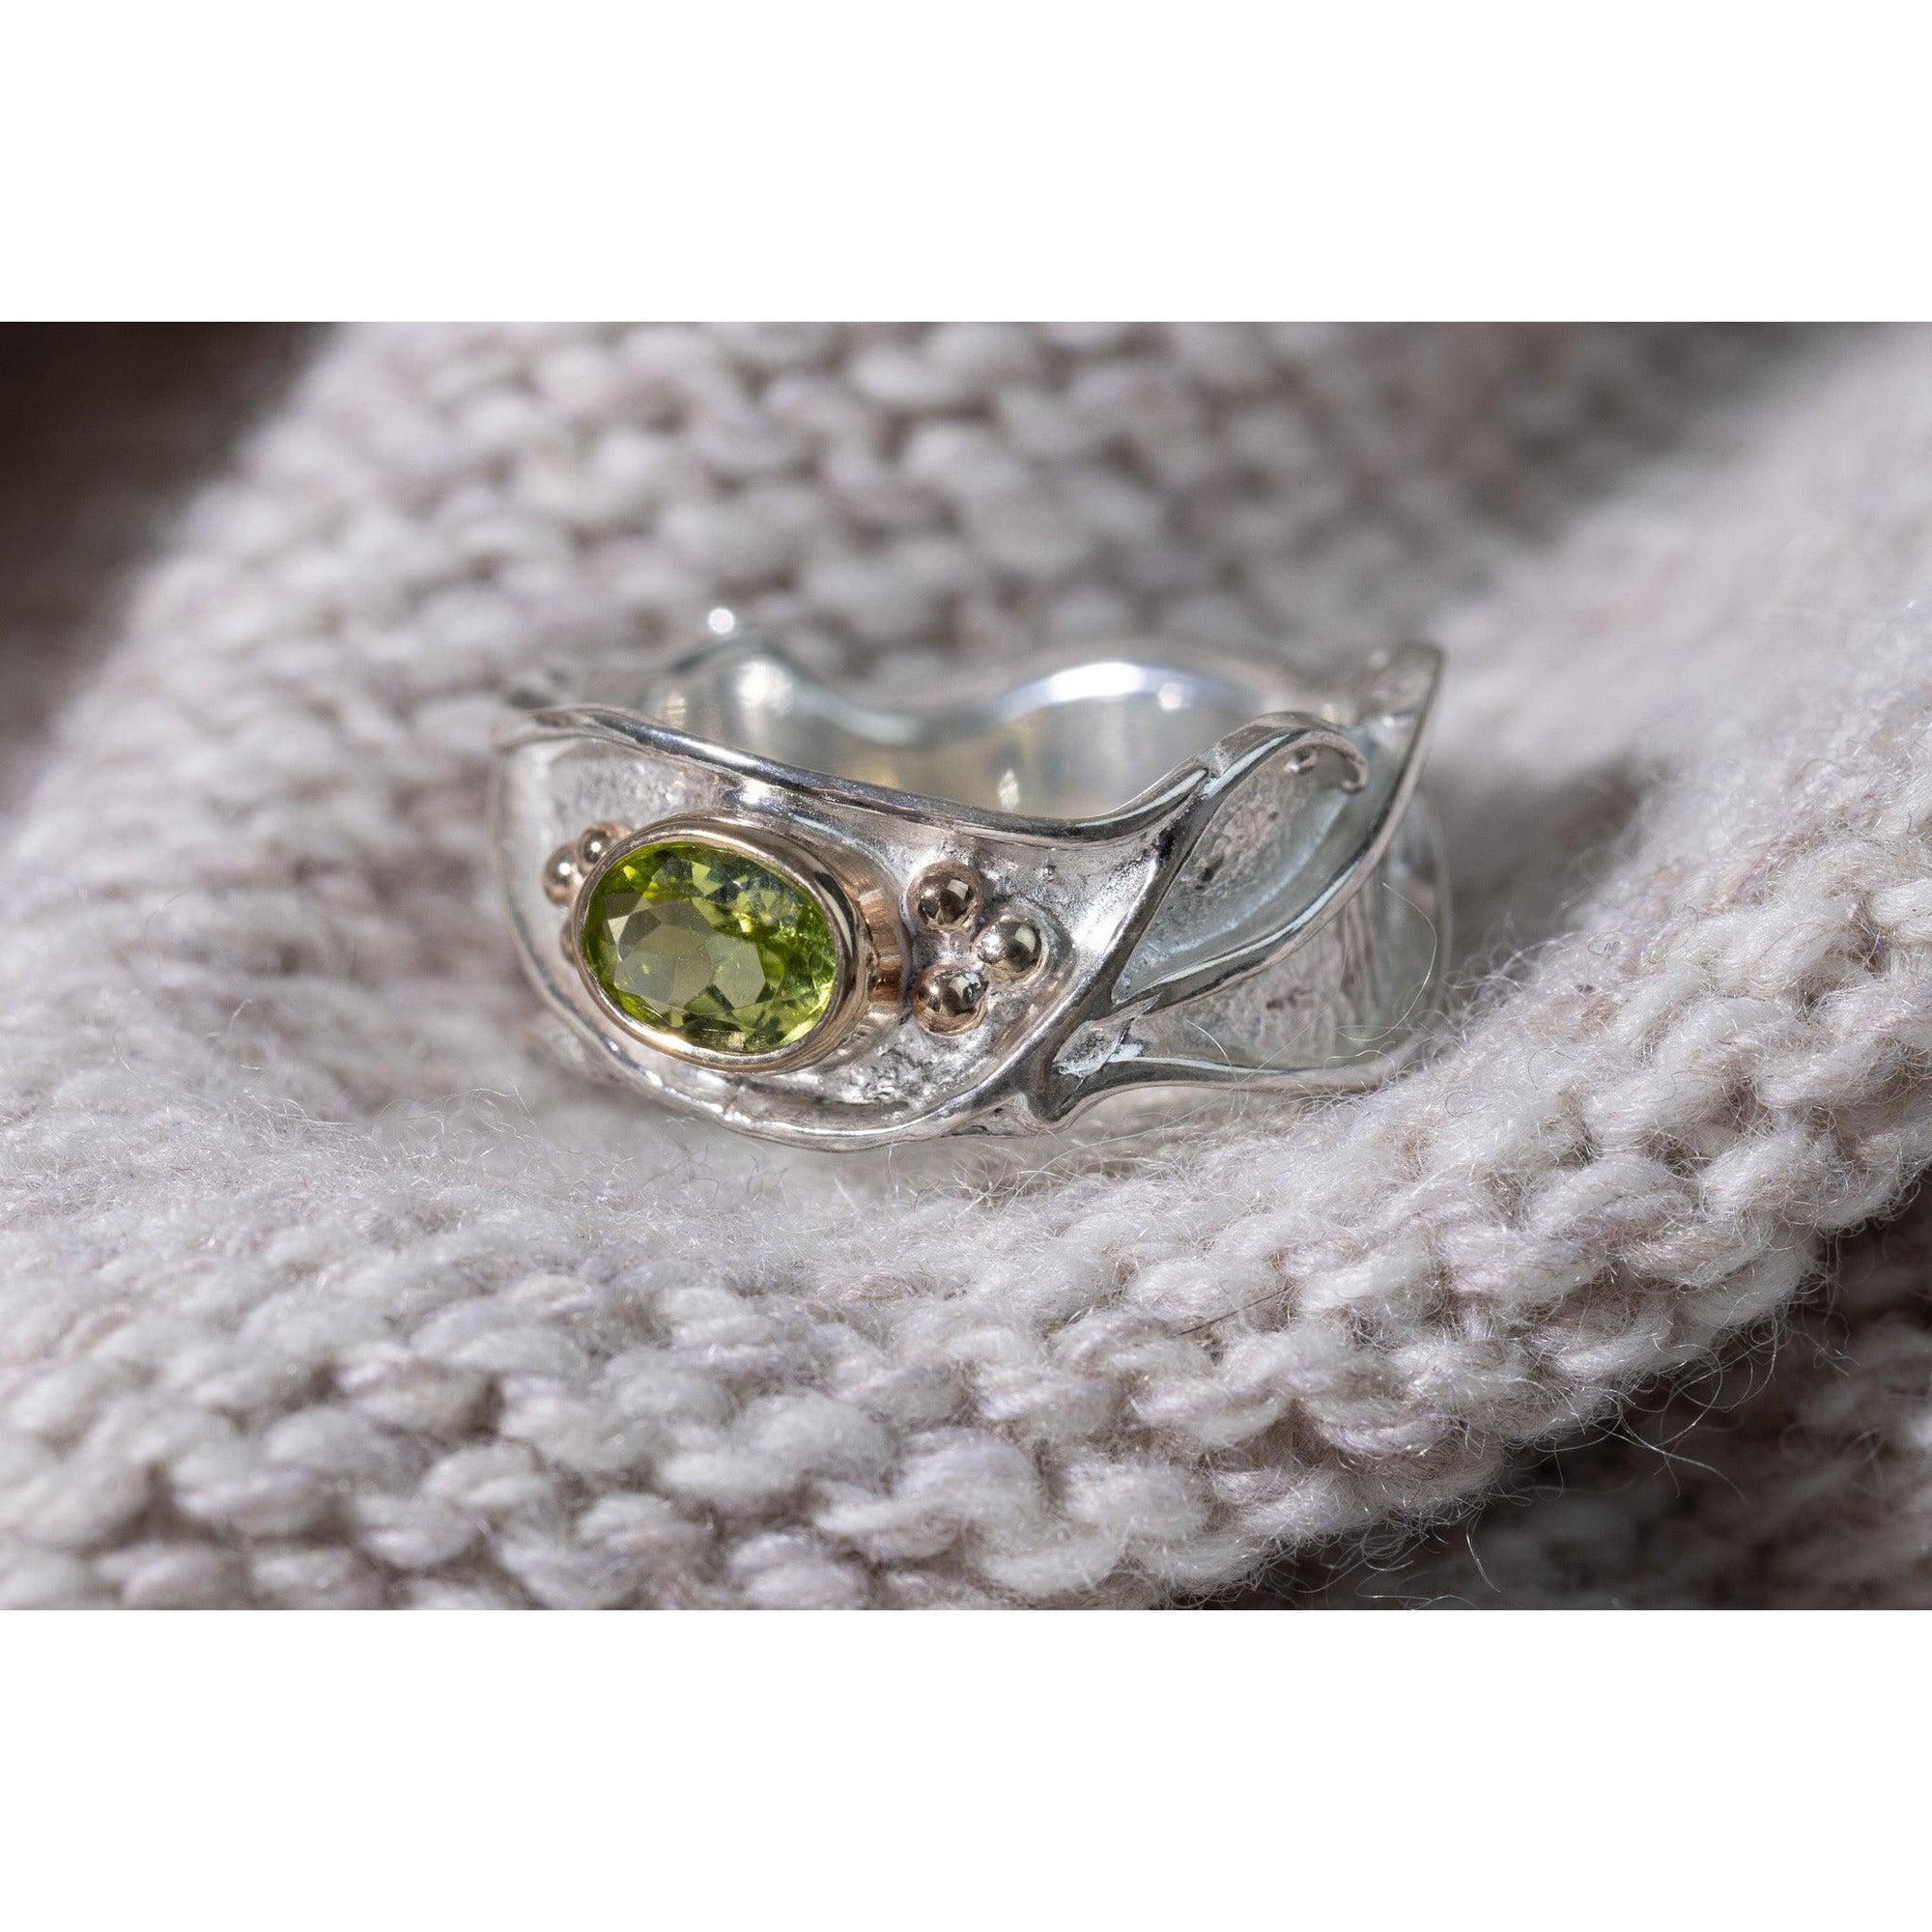 'LG60 - Silver Ring with 9ct Gold 8x5 Peridot Ring ' by Les Grimshaw, available at Padstow Gallery, Cornwall